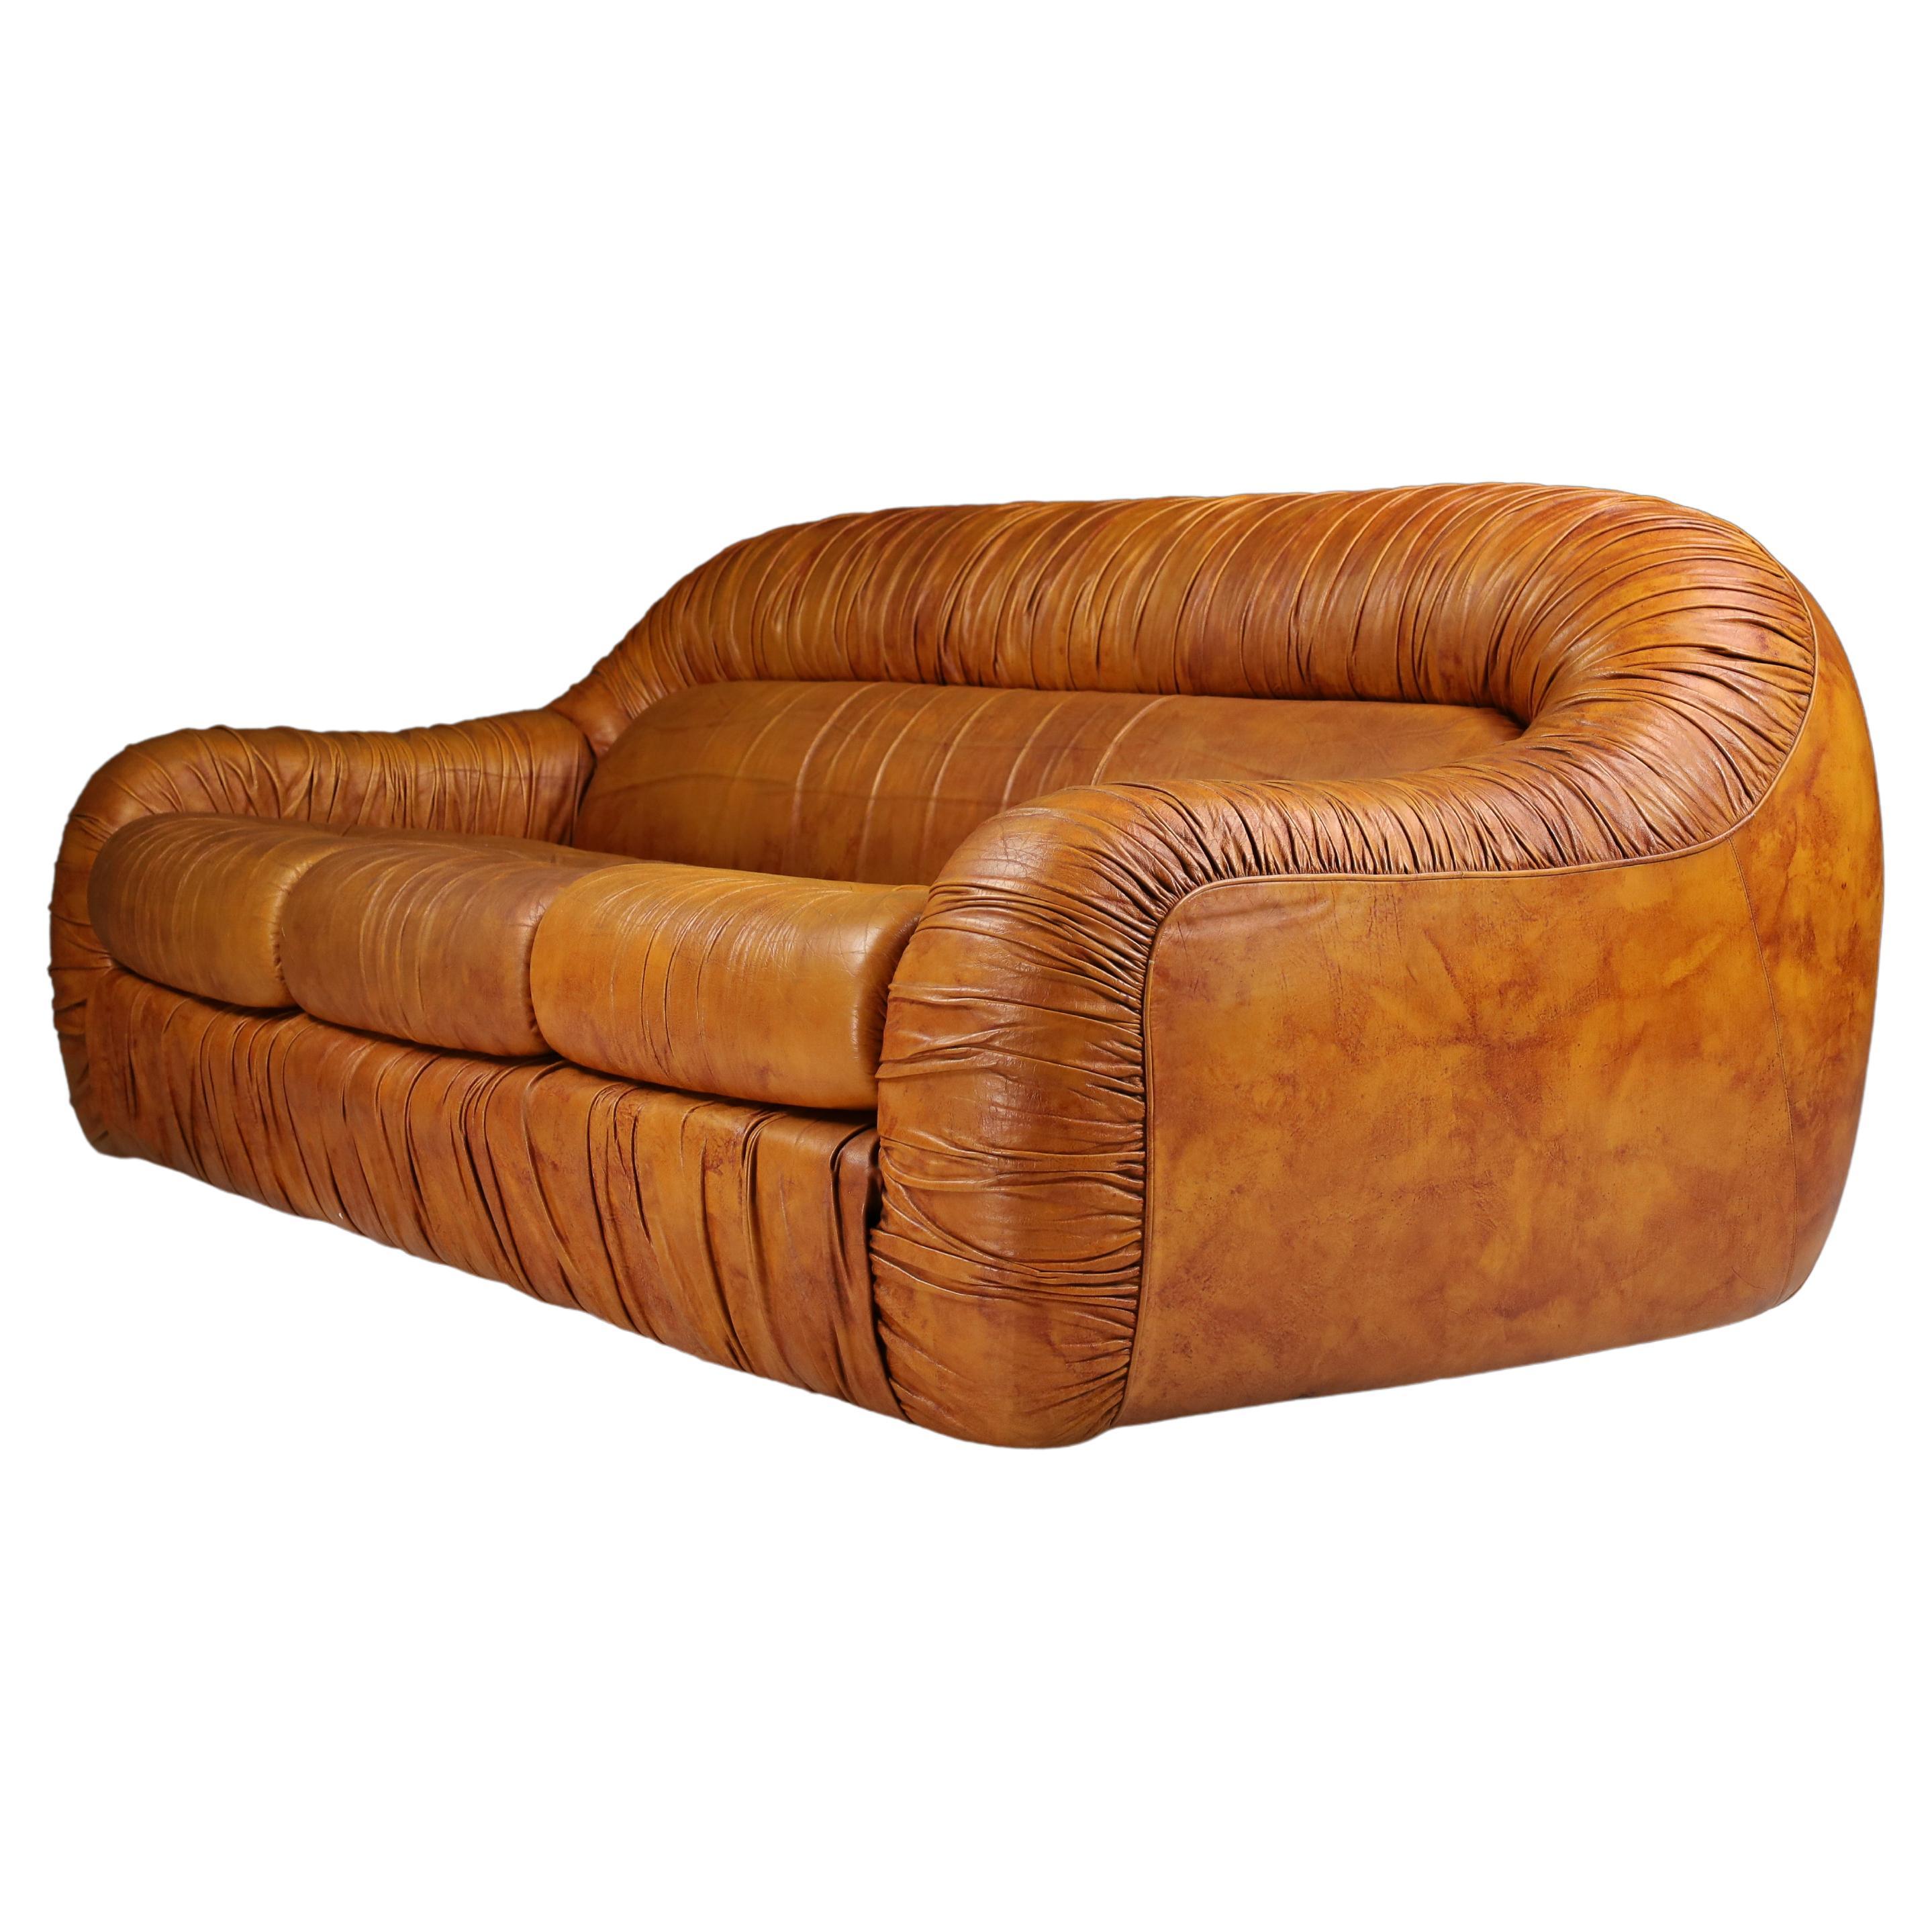 Lounge Sofa in Cognac Leather by George Bighinello for Eurosalotto, Italy, 1970s For Sale